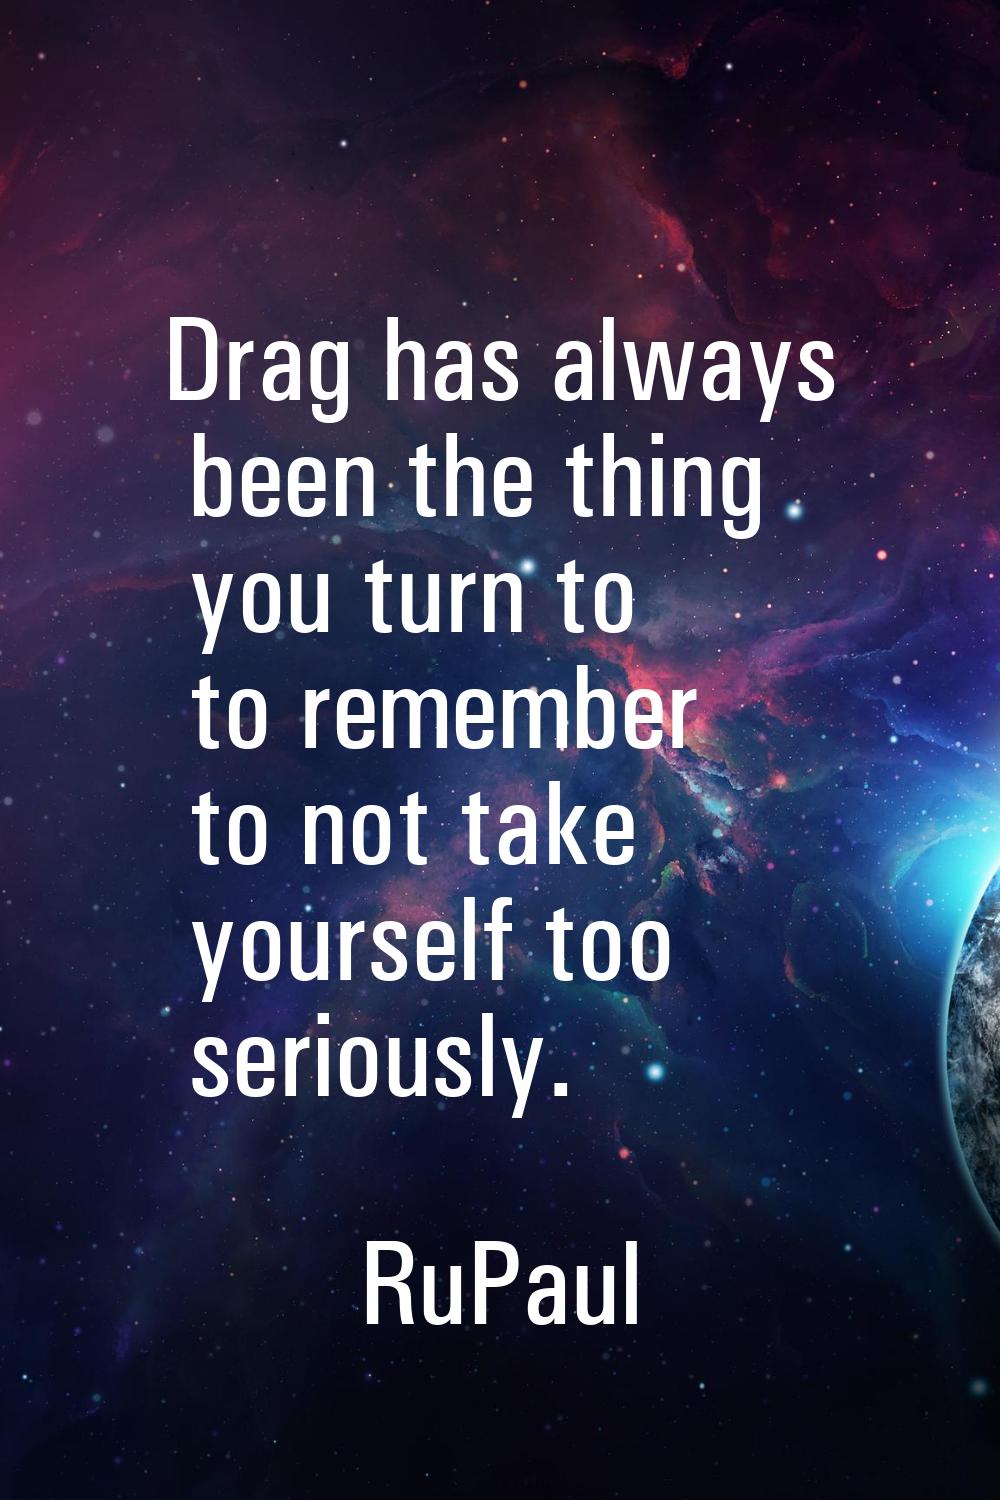 Drag has always been the thing you turn to to remember to not take yourself too seriously.